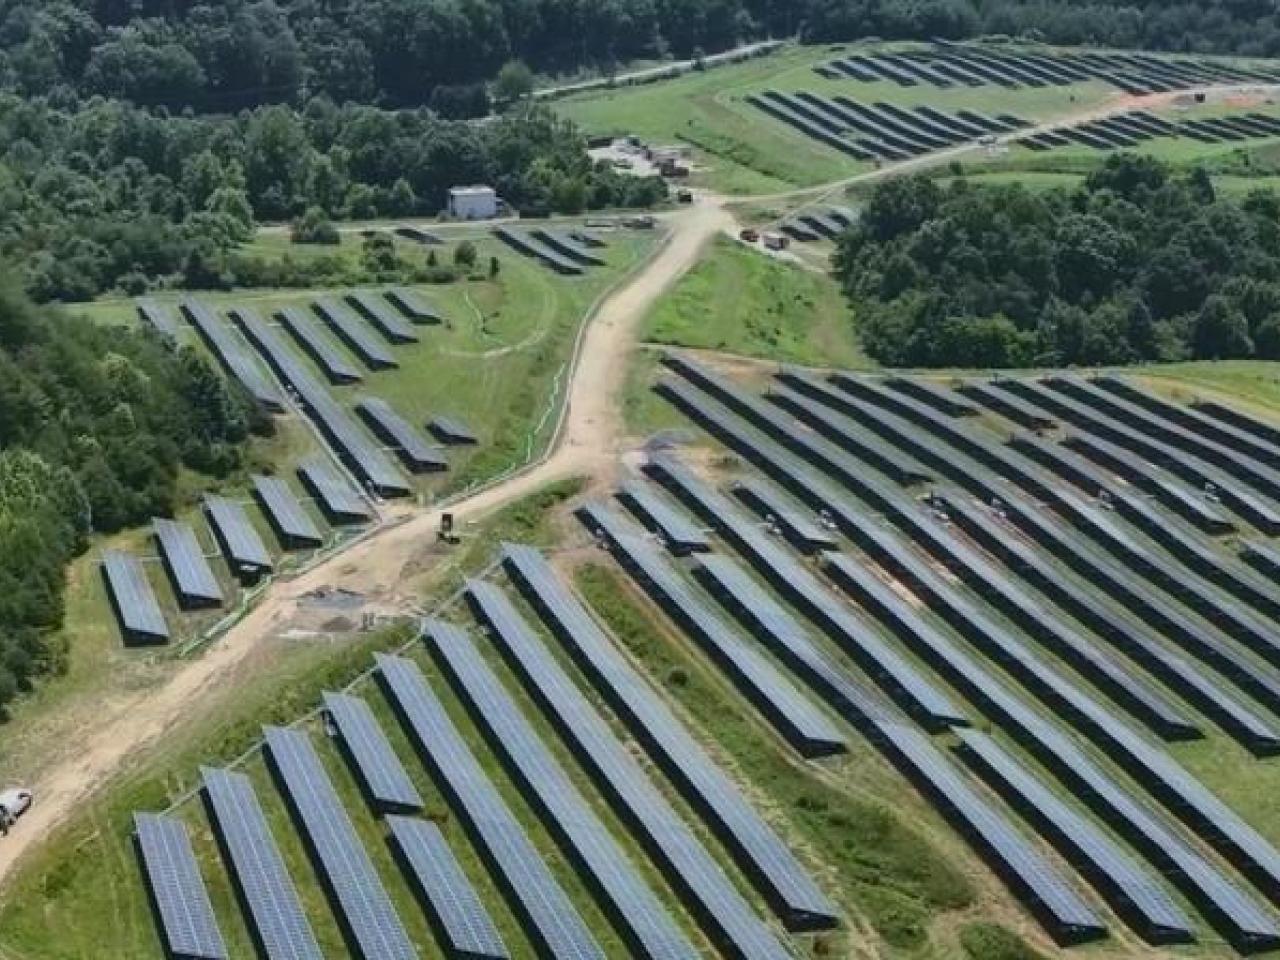 Aerial view of fields of rows of solar panels in a forested area.